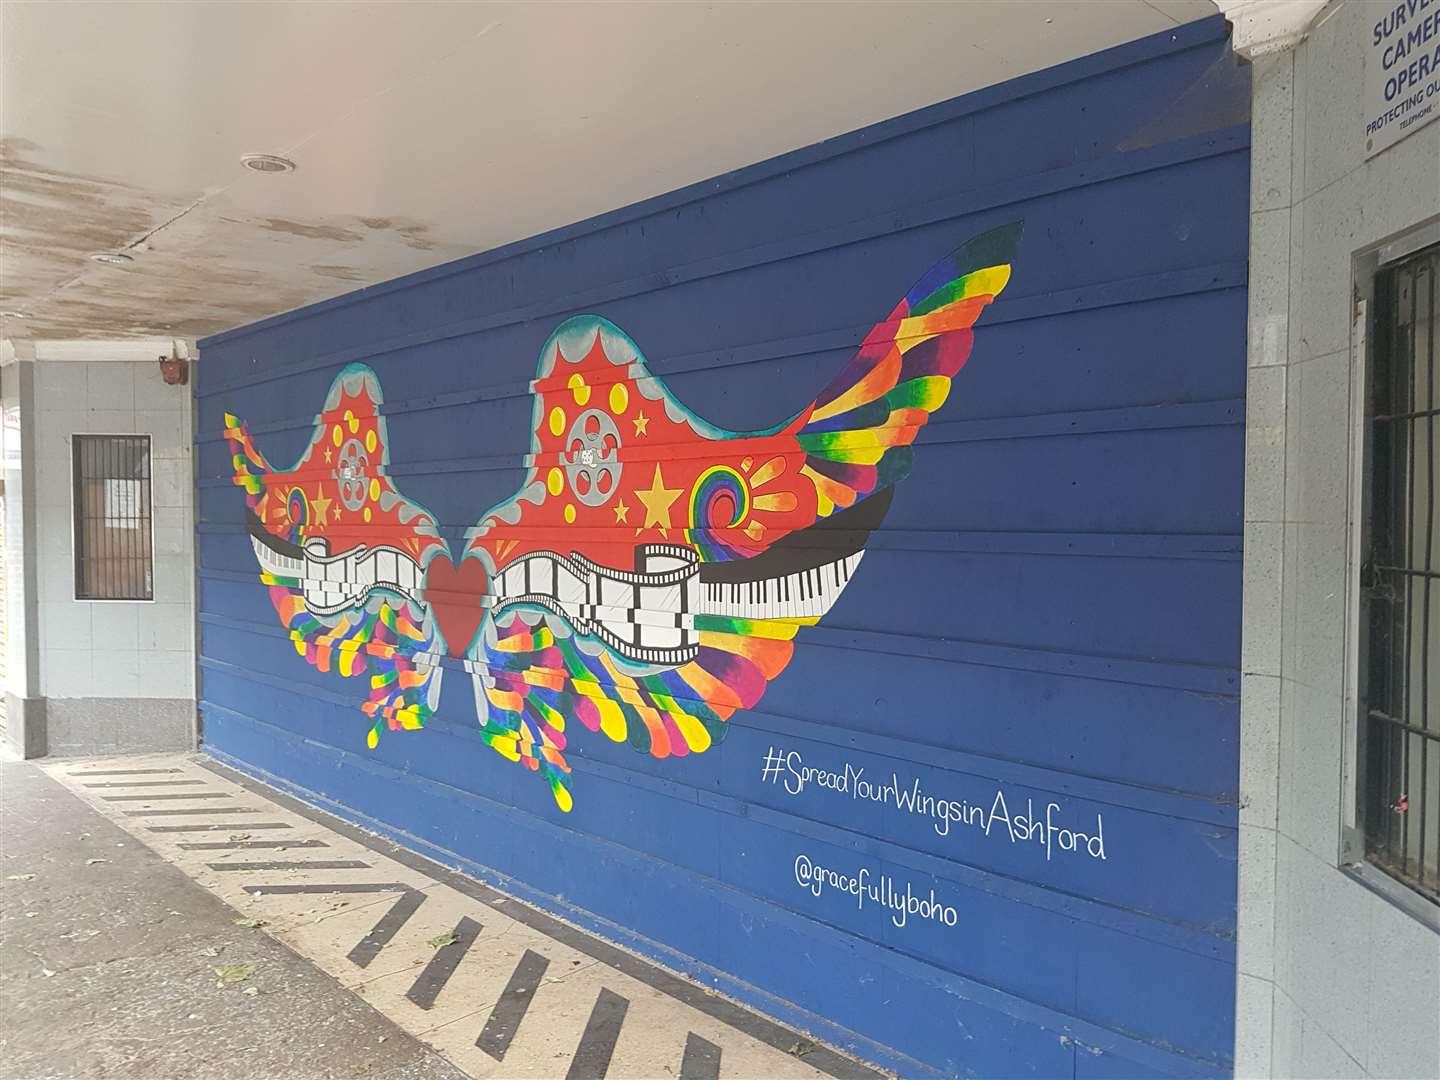 The 'spread your wings in Ashford' mural has been completed